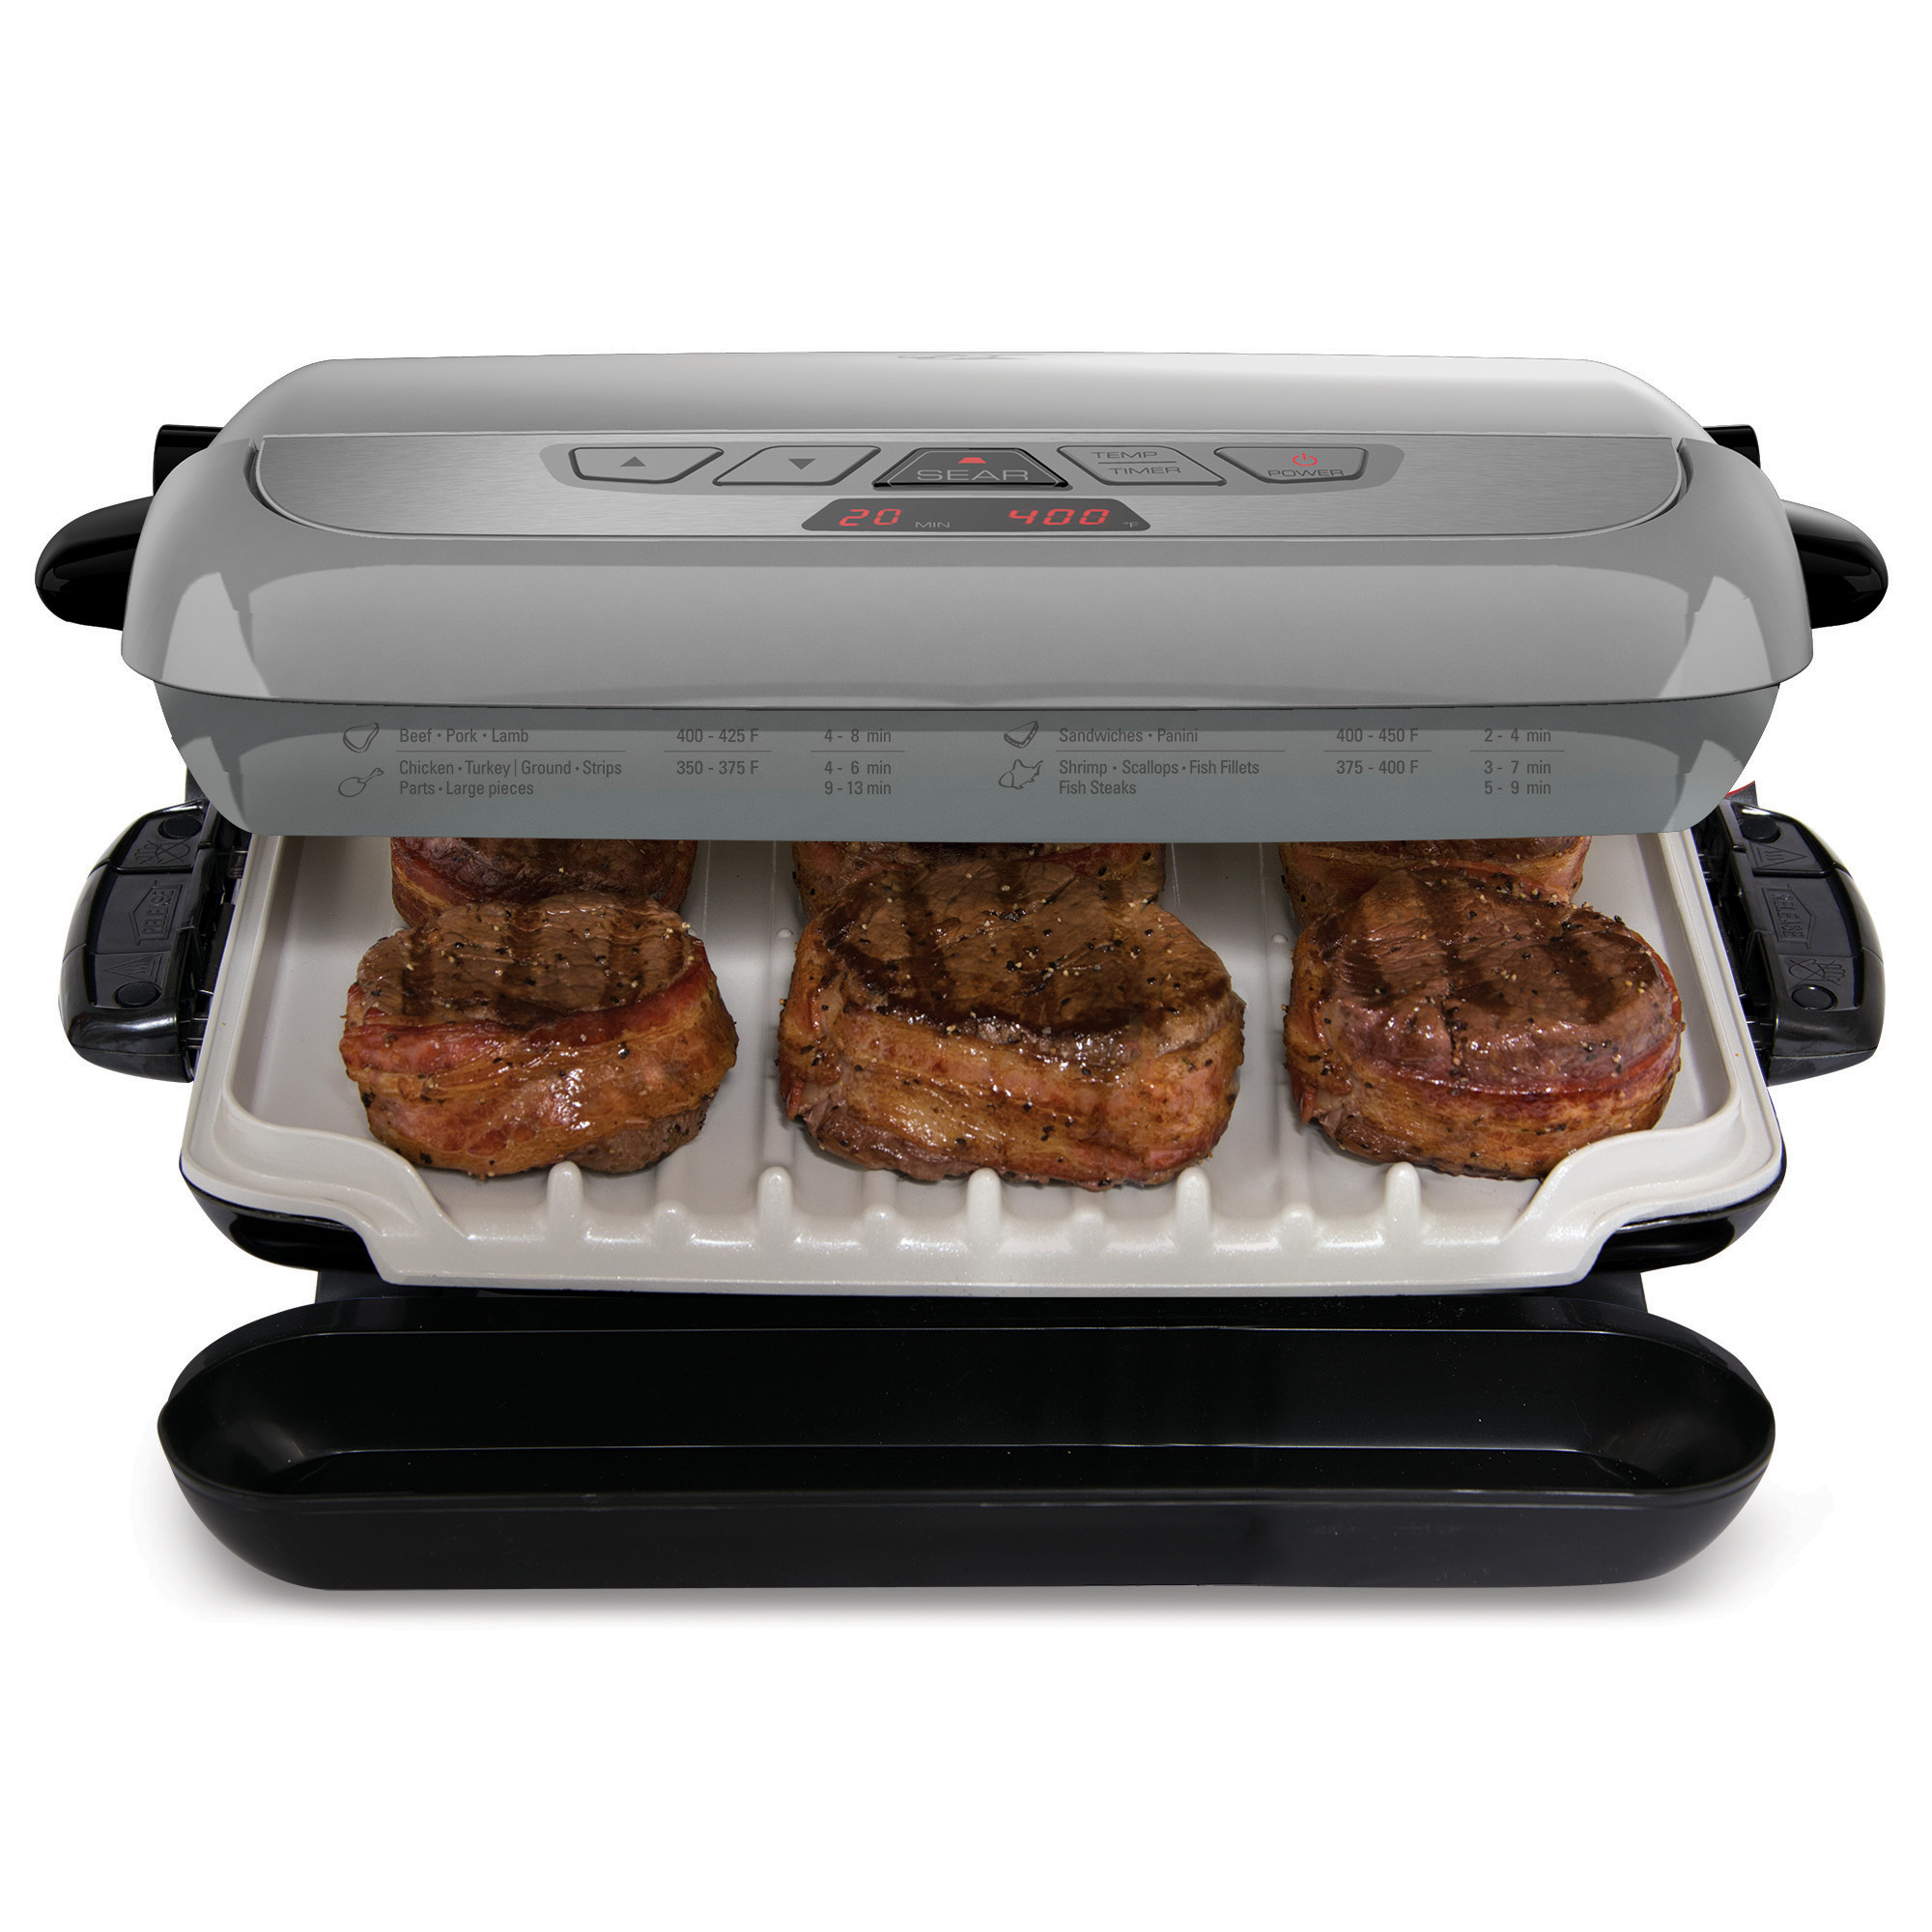 George Foreman Grp4842P Multi-Plate Evolve Grill With Ceramic Grilling Plates  A